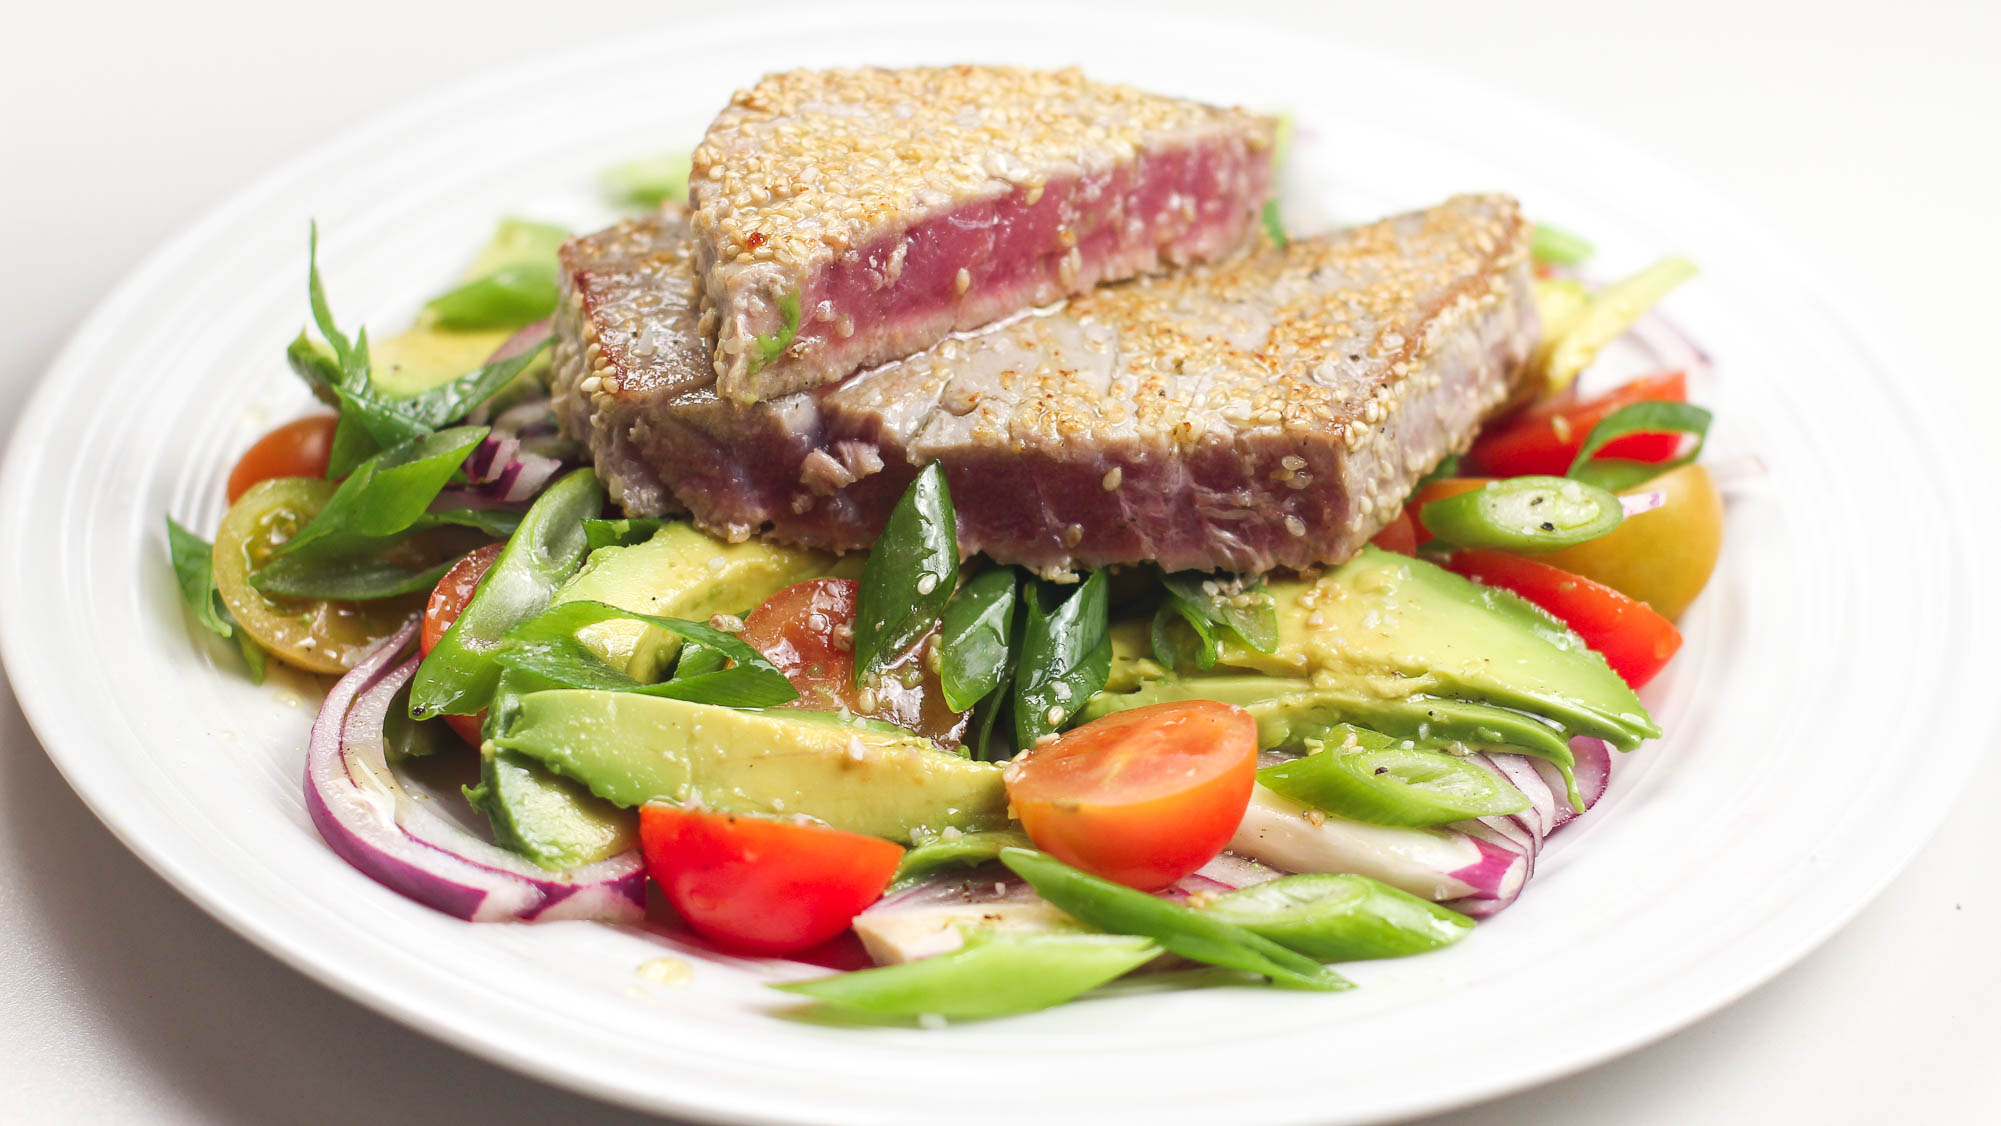 Delicious Ahi tUna Salad with Cherry tomatoes on a plate.